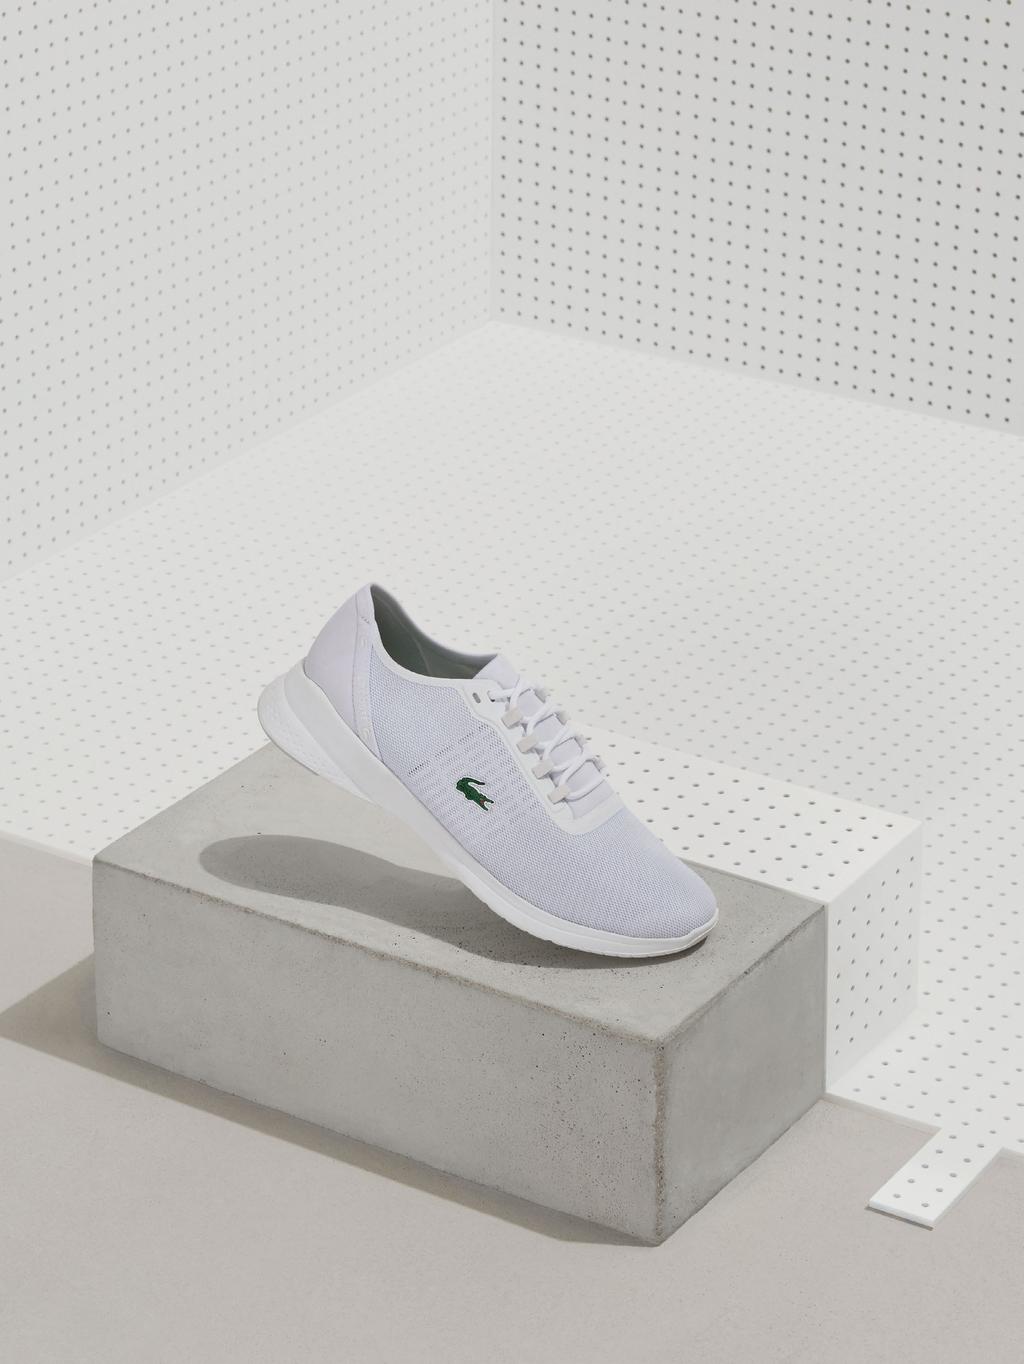 Lacoste Tennis Campaign Name Communication Your Game Your Style Position Lacoste as a stylish, current sport-lifestyle brand. Narrative The energy of the court, worn your way.